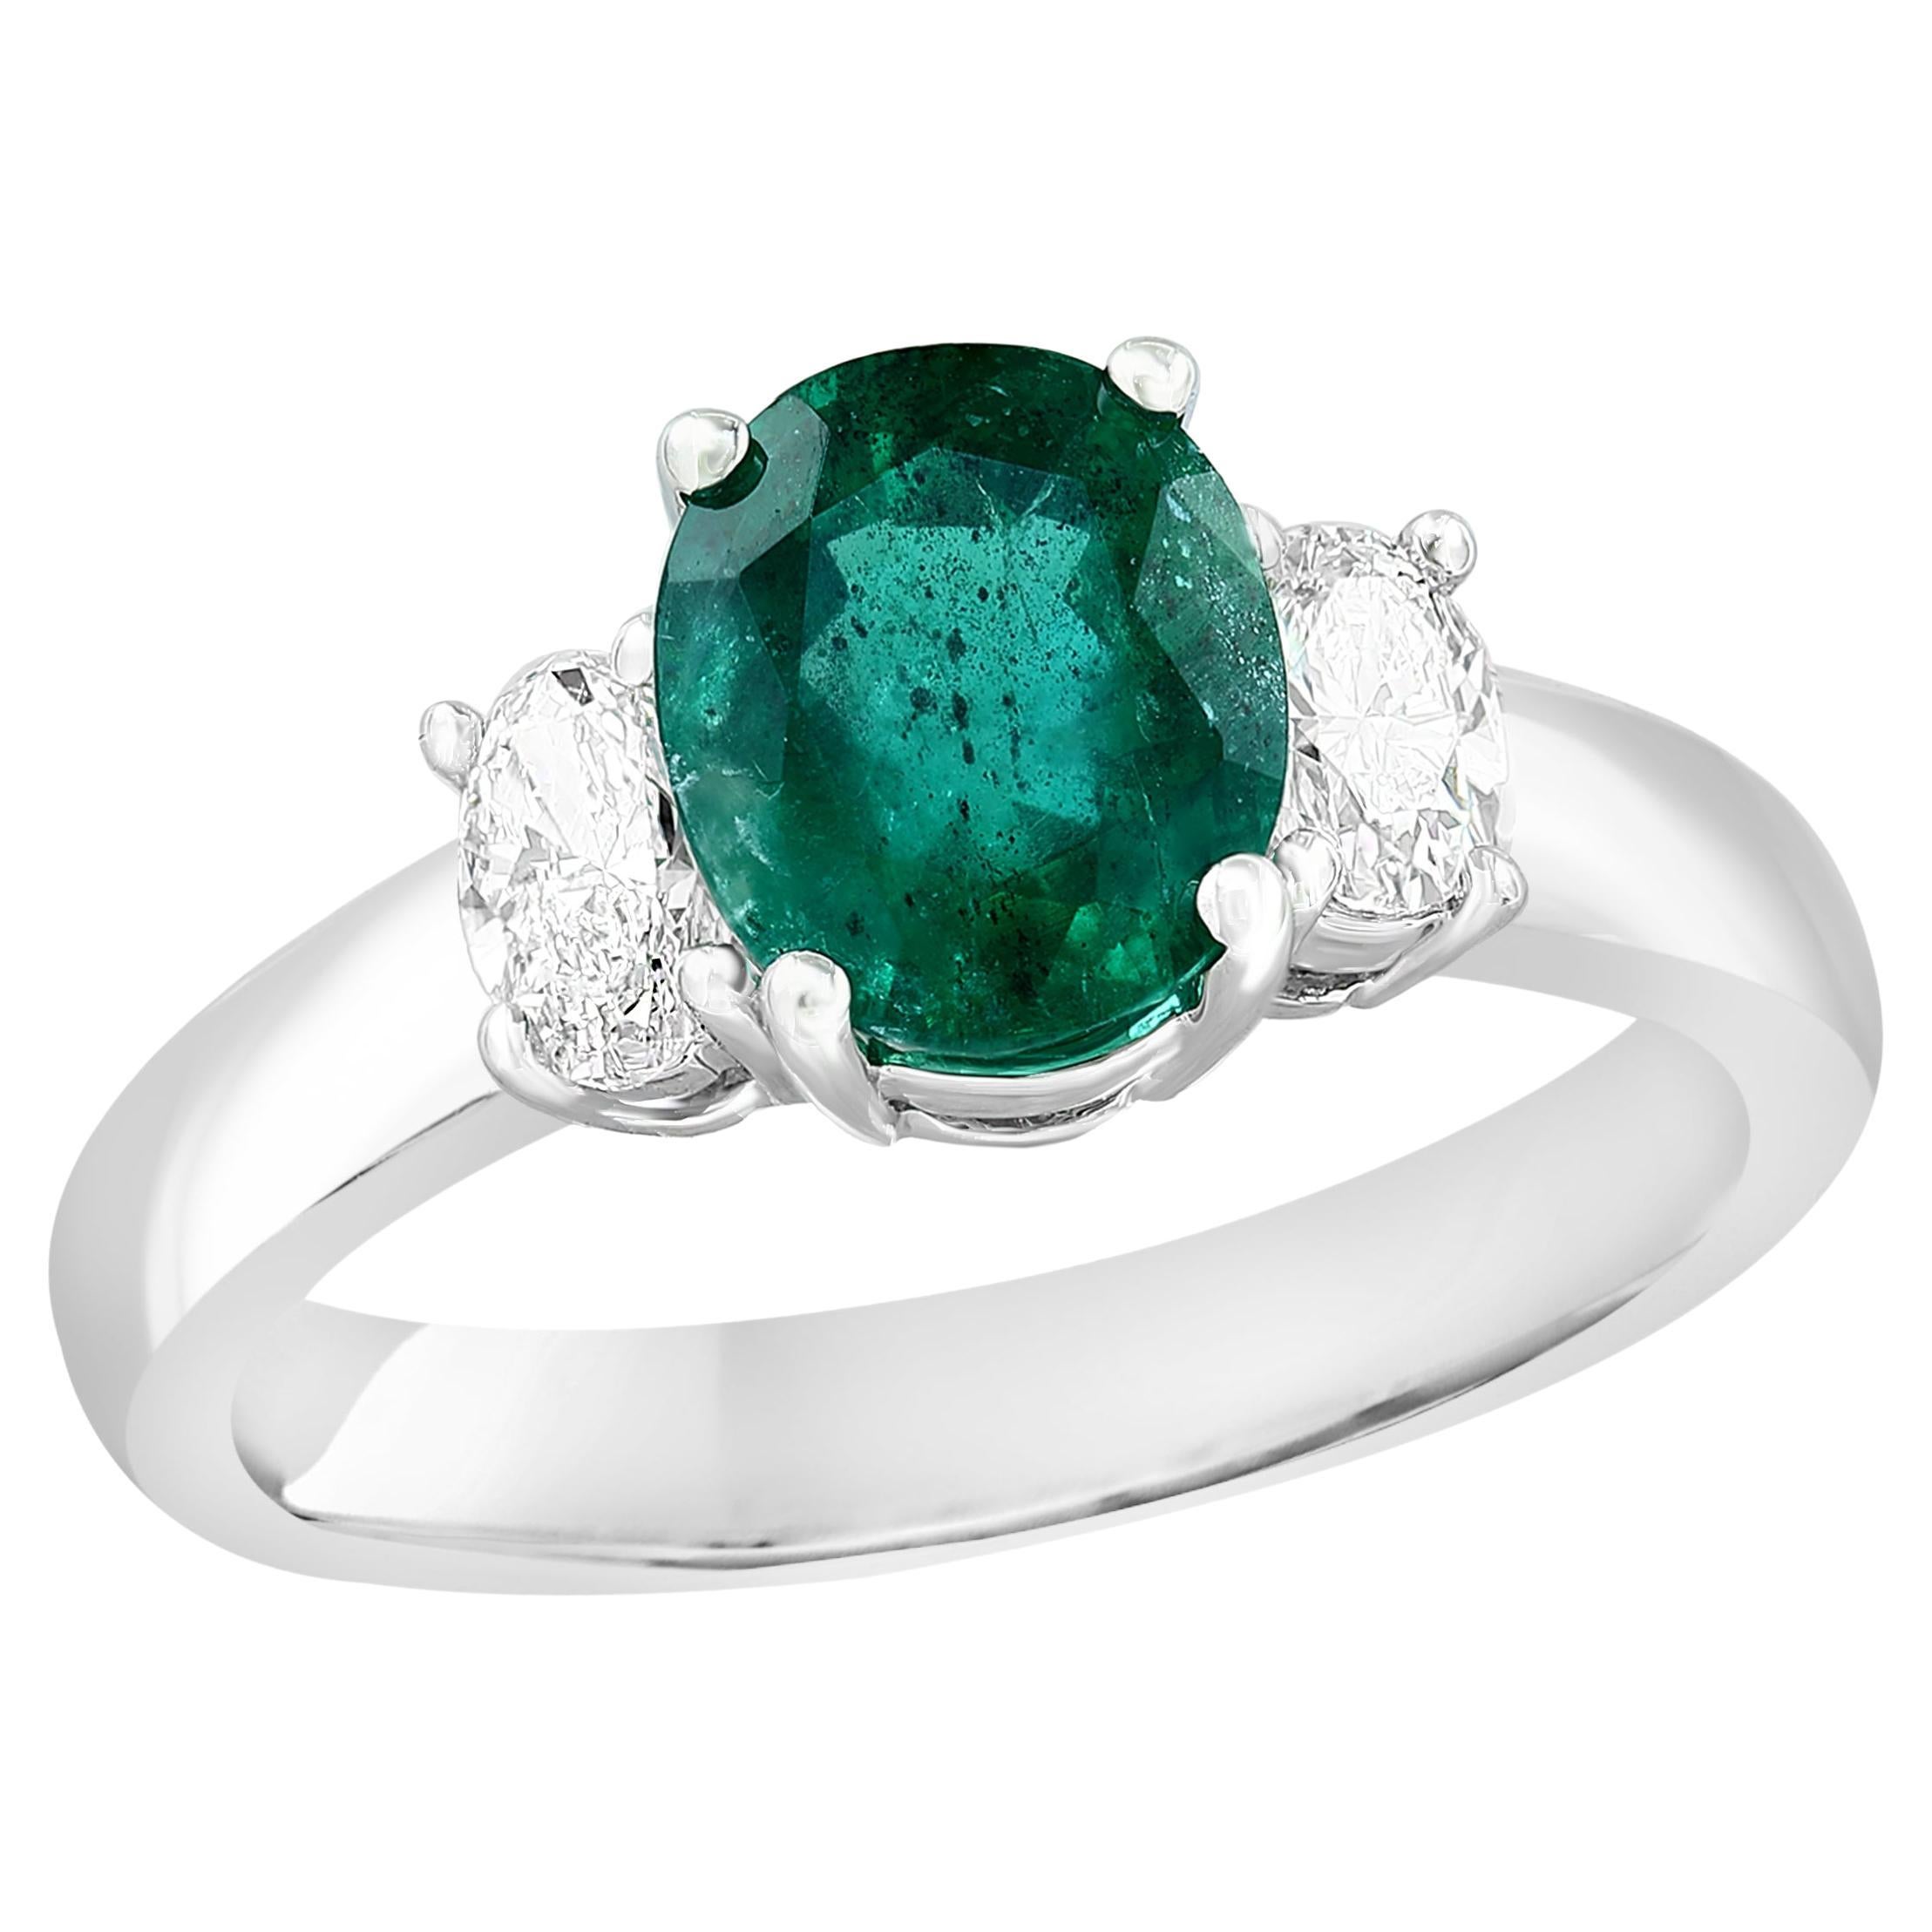 1.97 Carat Oval Cut Emerald & Diamond 3 Stone Engagement Ring in 18k White Gold